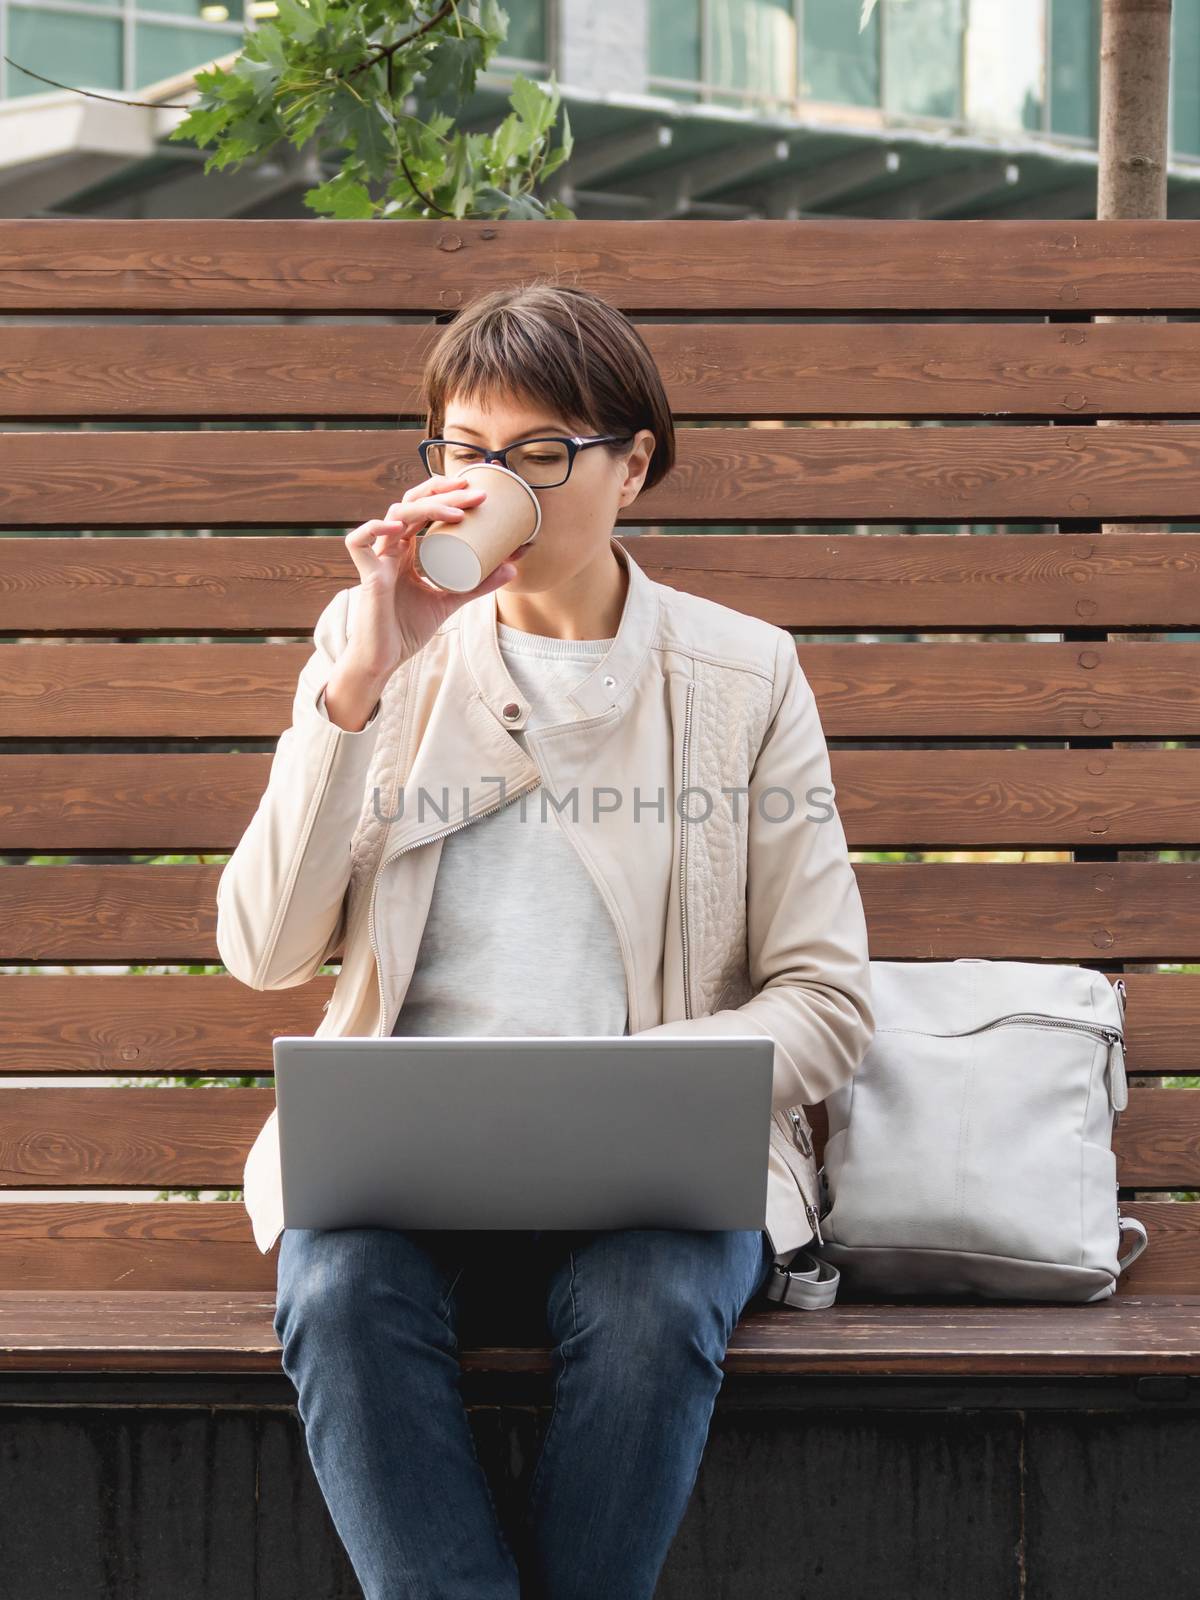 Freelance business woman sits in park with laptop and take away cardboard cup of coffee. Casual clothes, urban lifestyle of millennials. Working remotely.